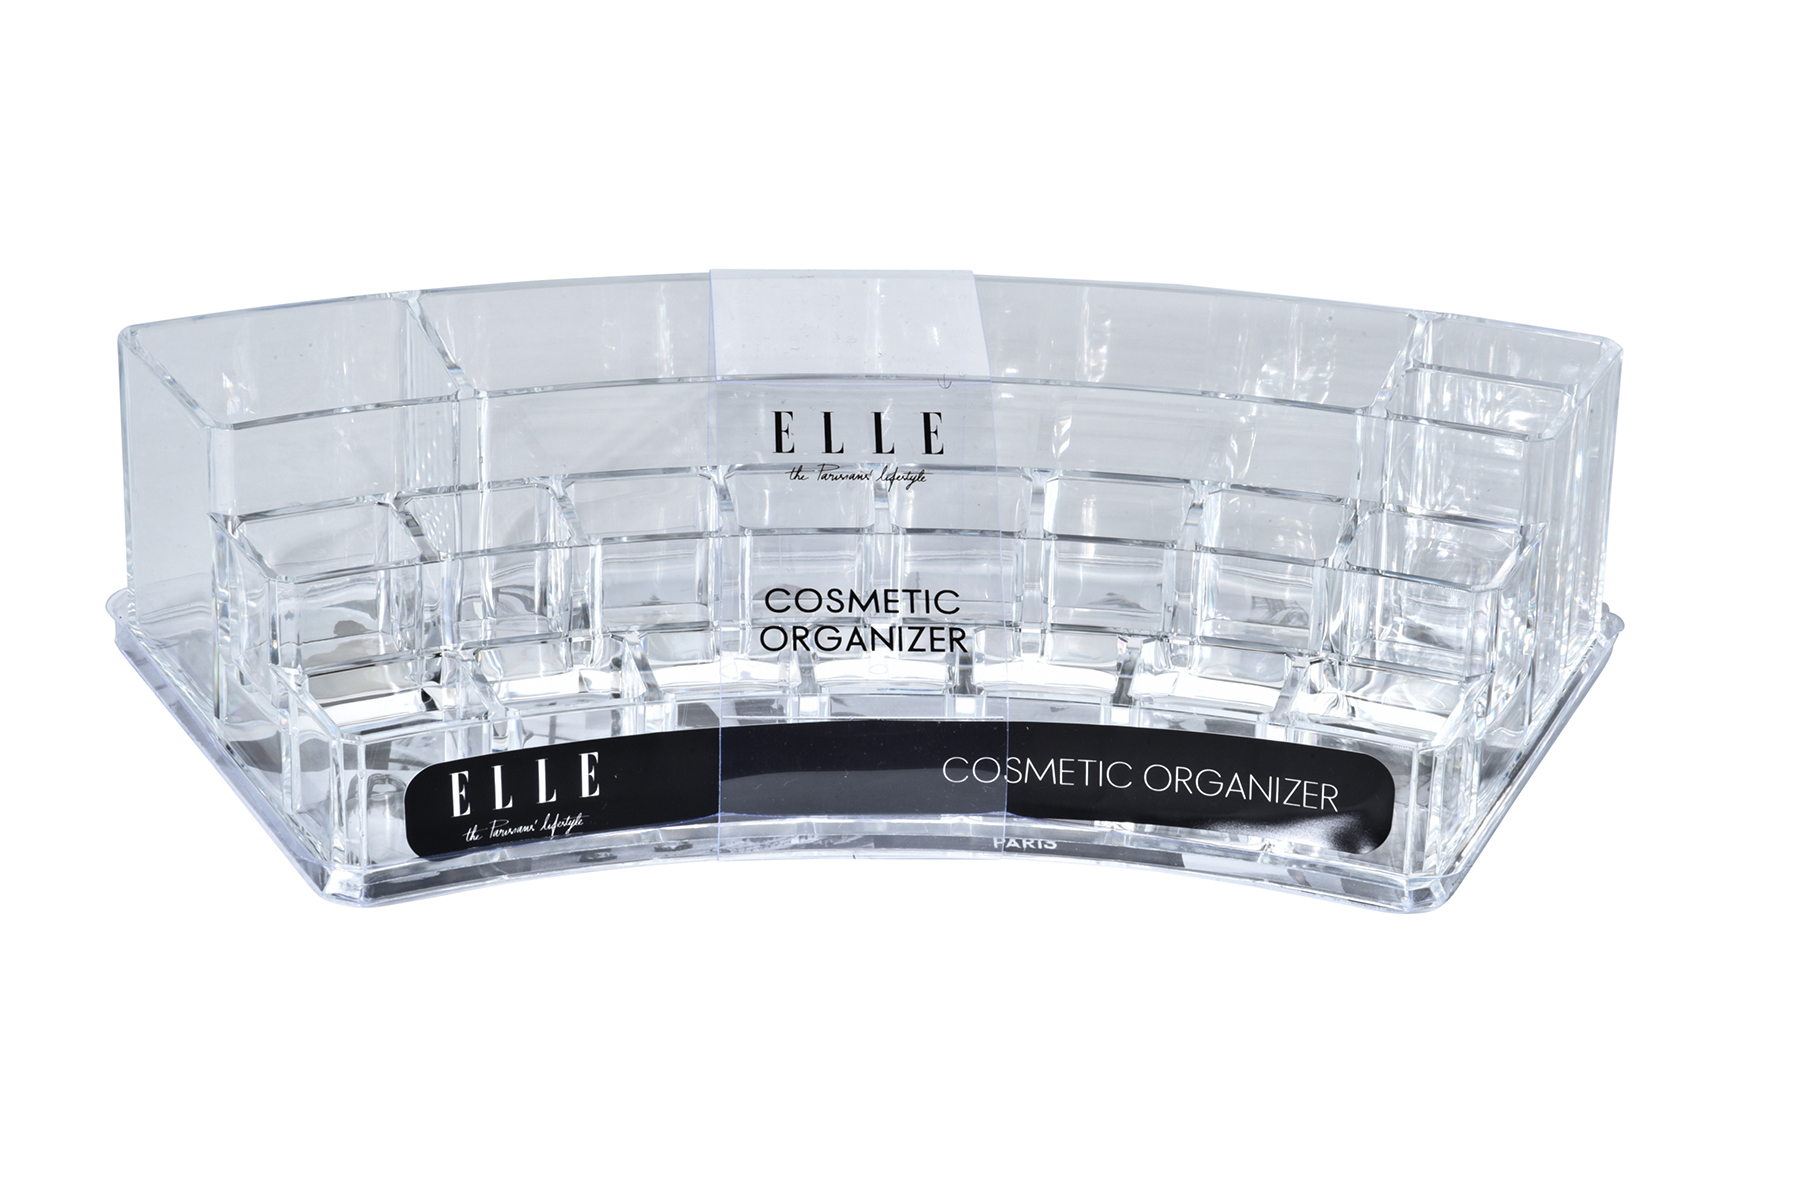 ELLE The Parisians Lifestyle Collection Clear Acrylic COSMETIC Organizers